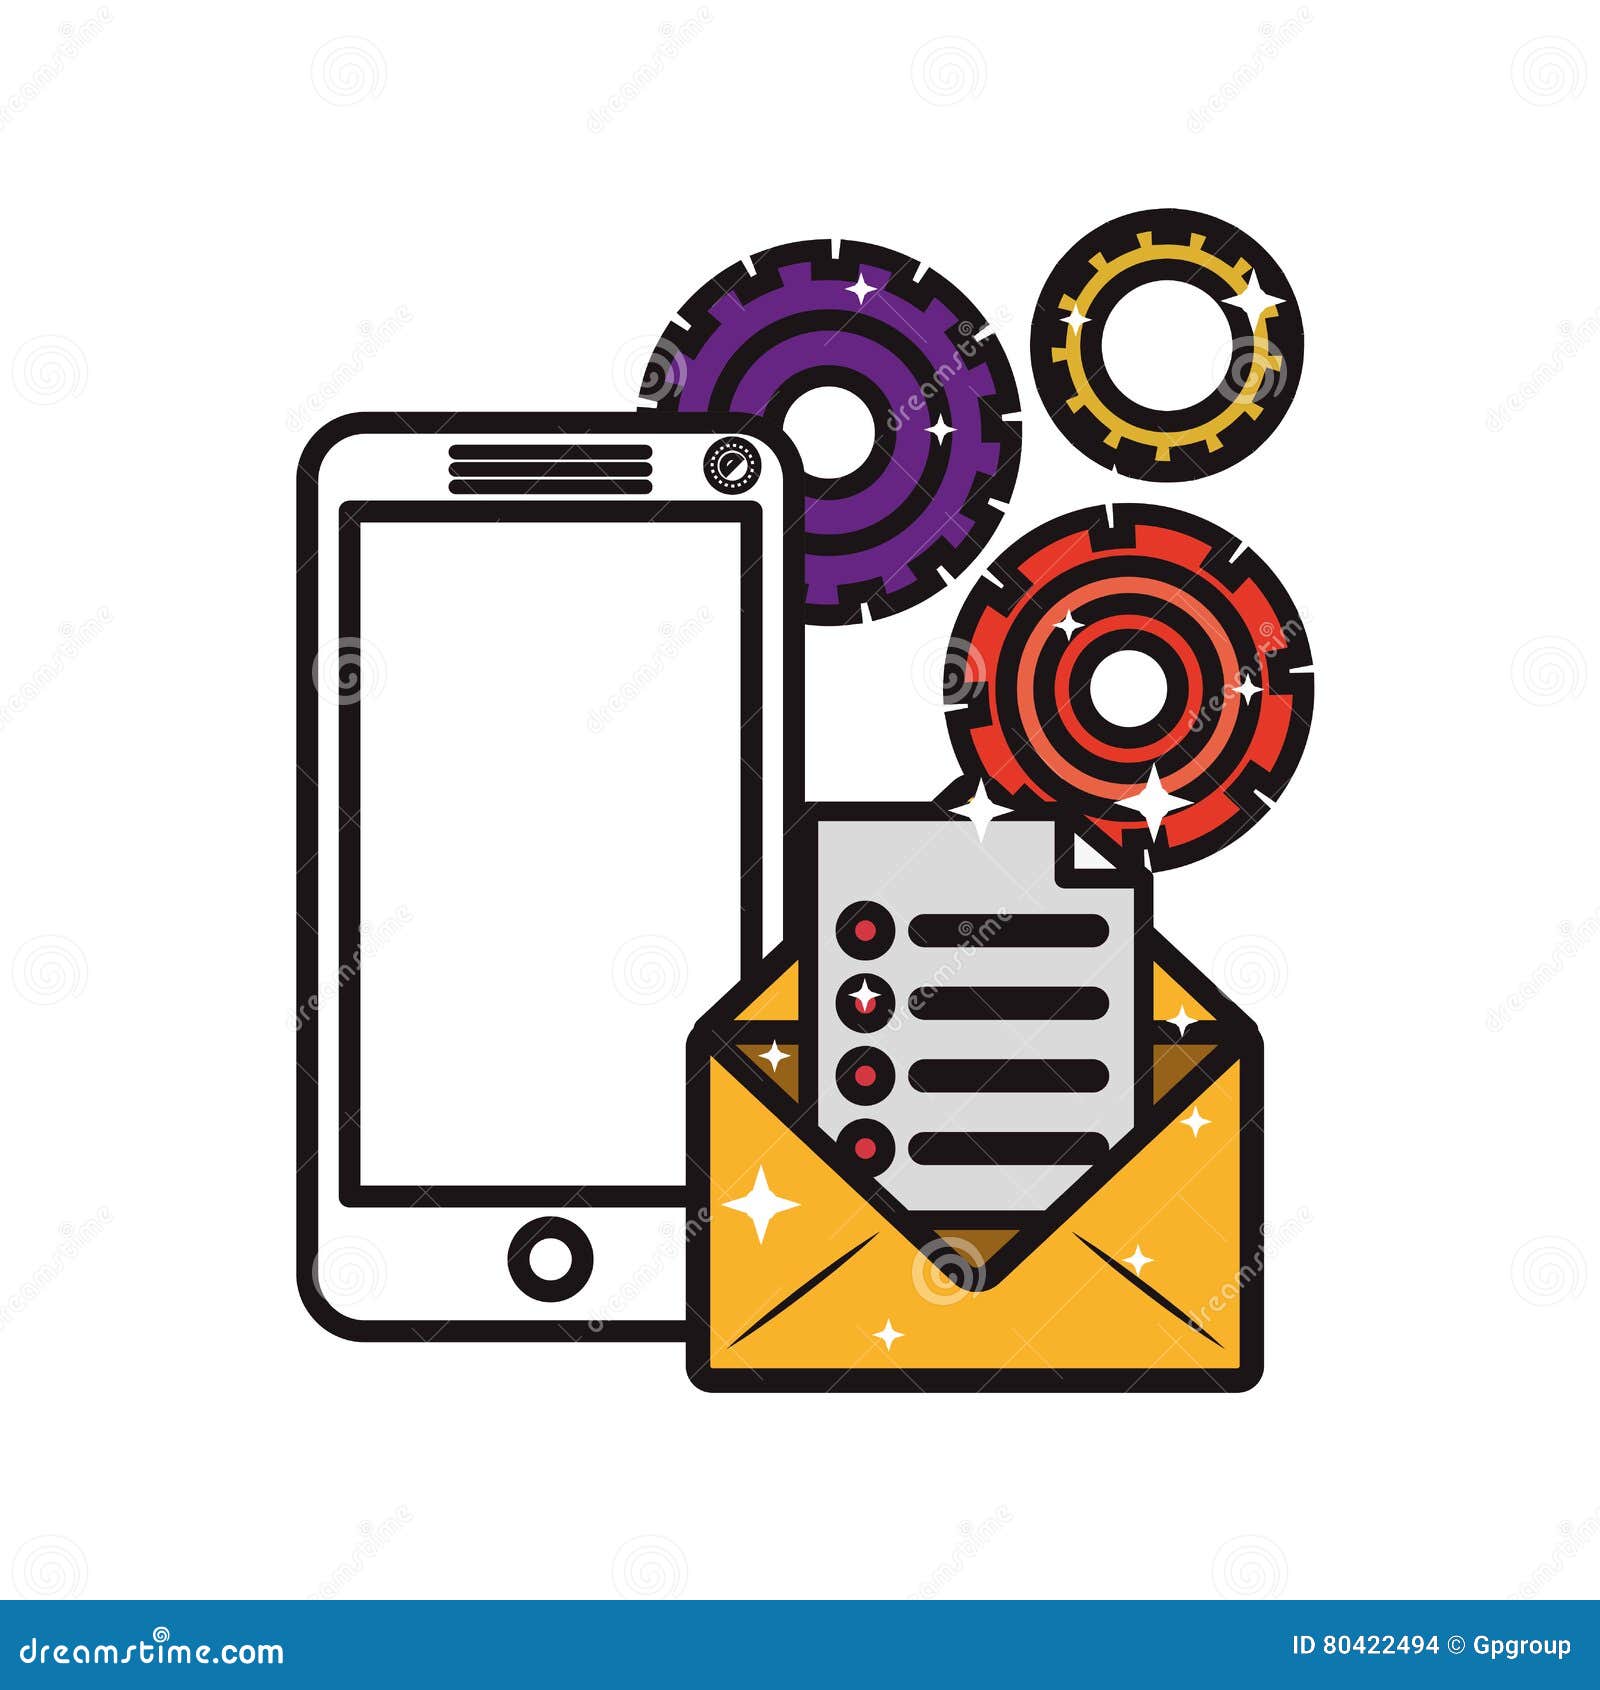 Modern cellphone with internet related icons image vector illustration design